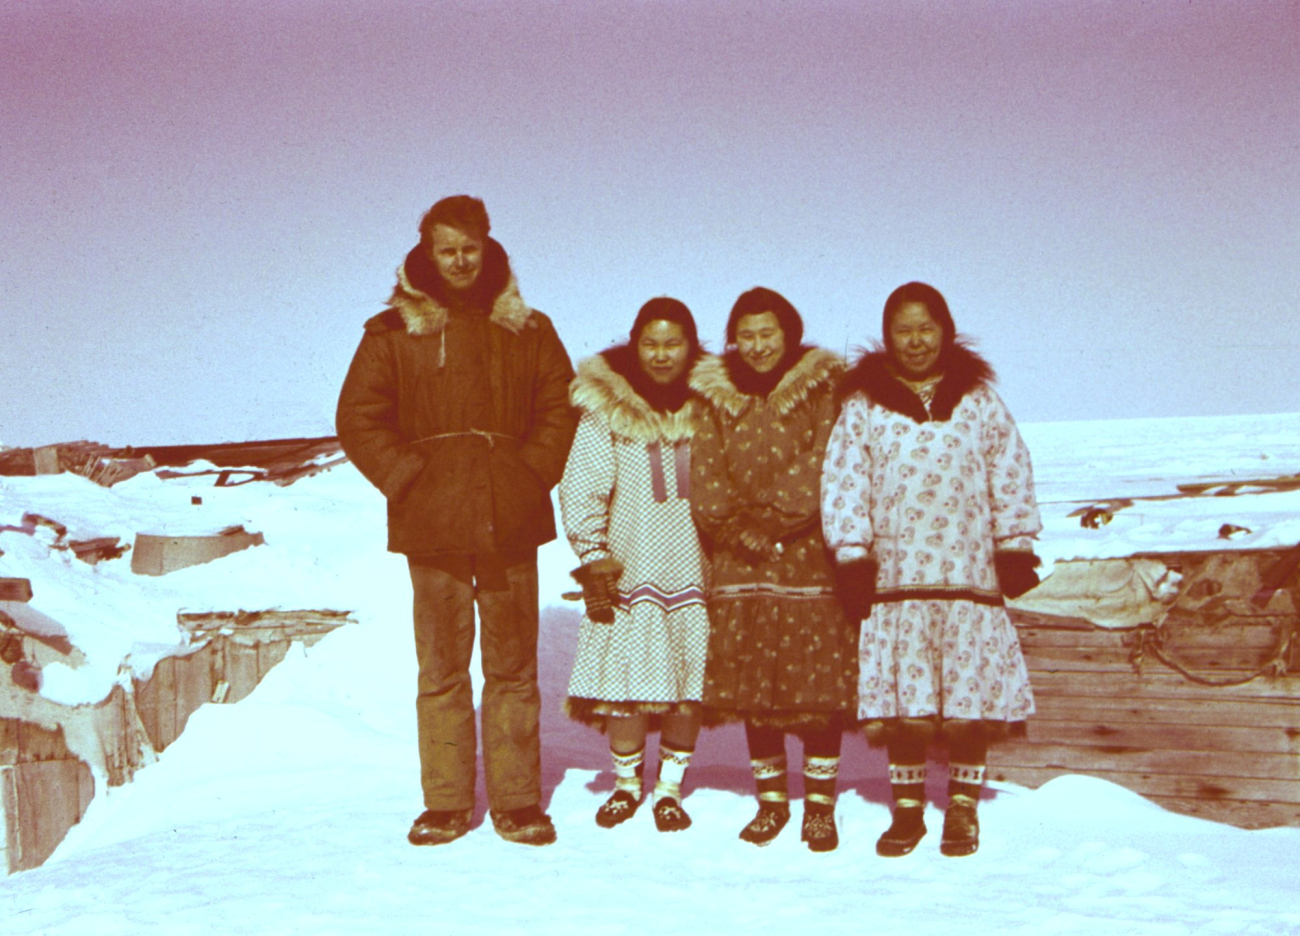 Harley Nygren with a group of Eskimos at Brownlow Pointacross from Flaxman Island